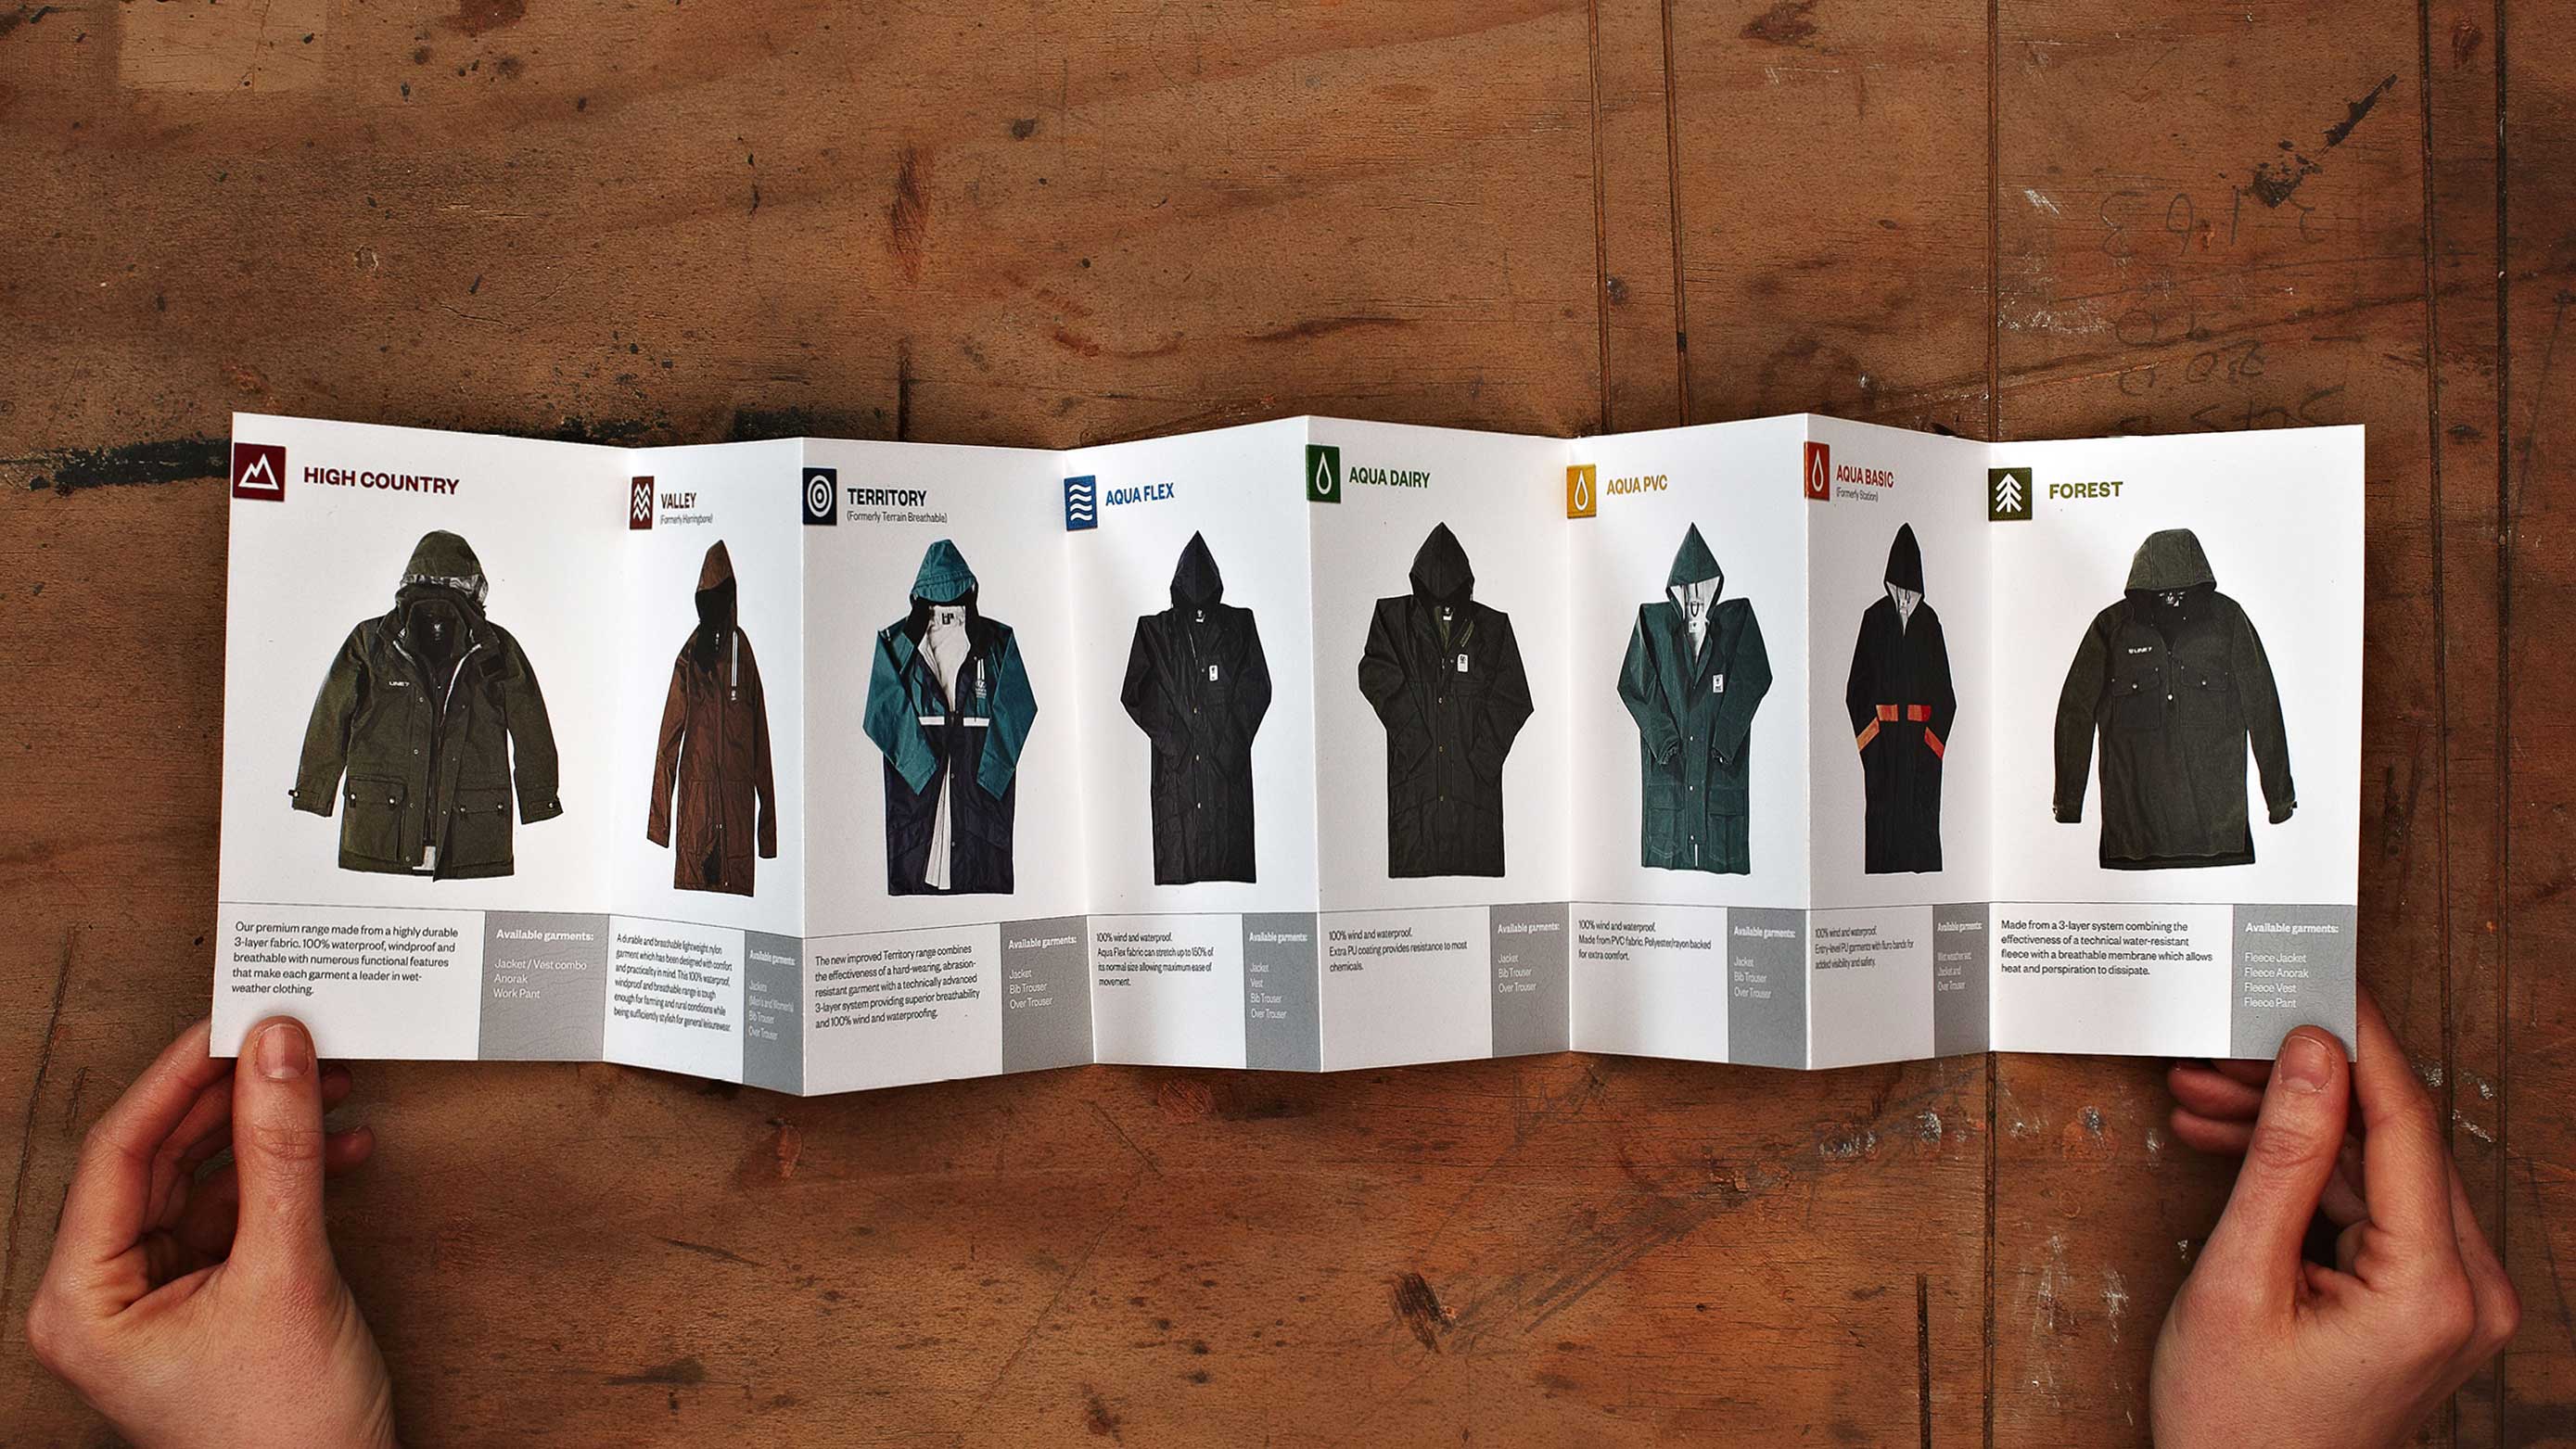 Pamphlet unfolded to show all the different clothing options Line 7 offers